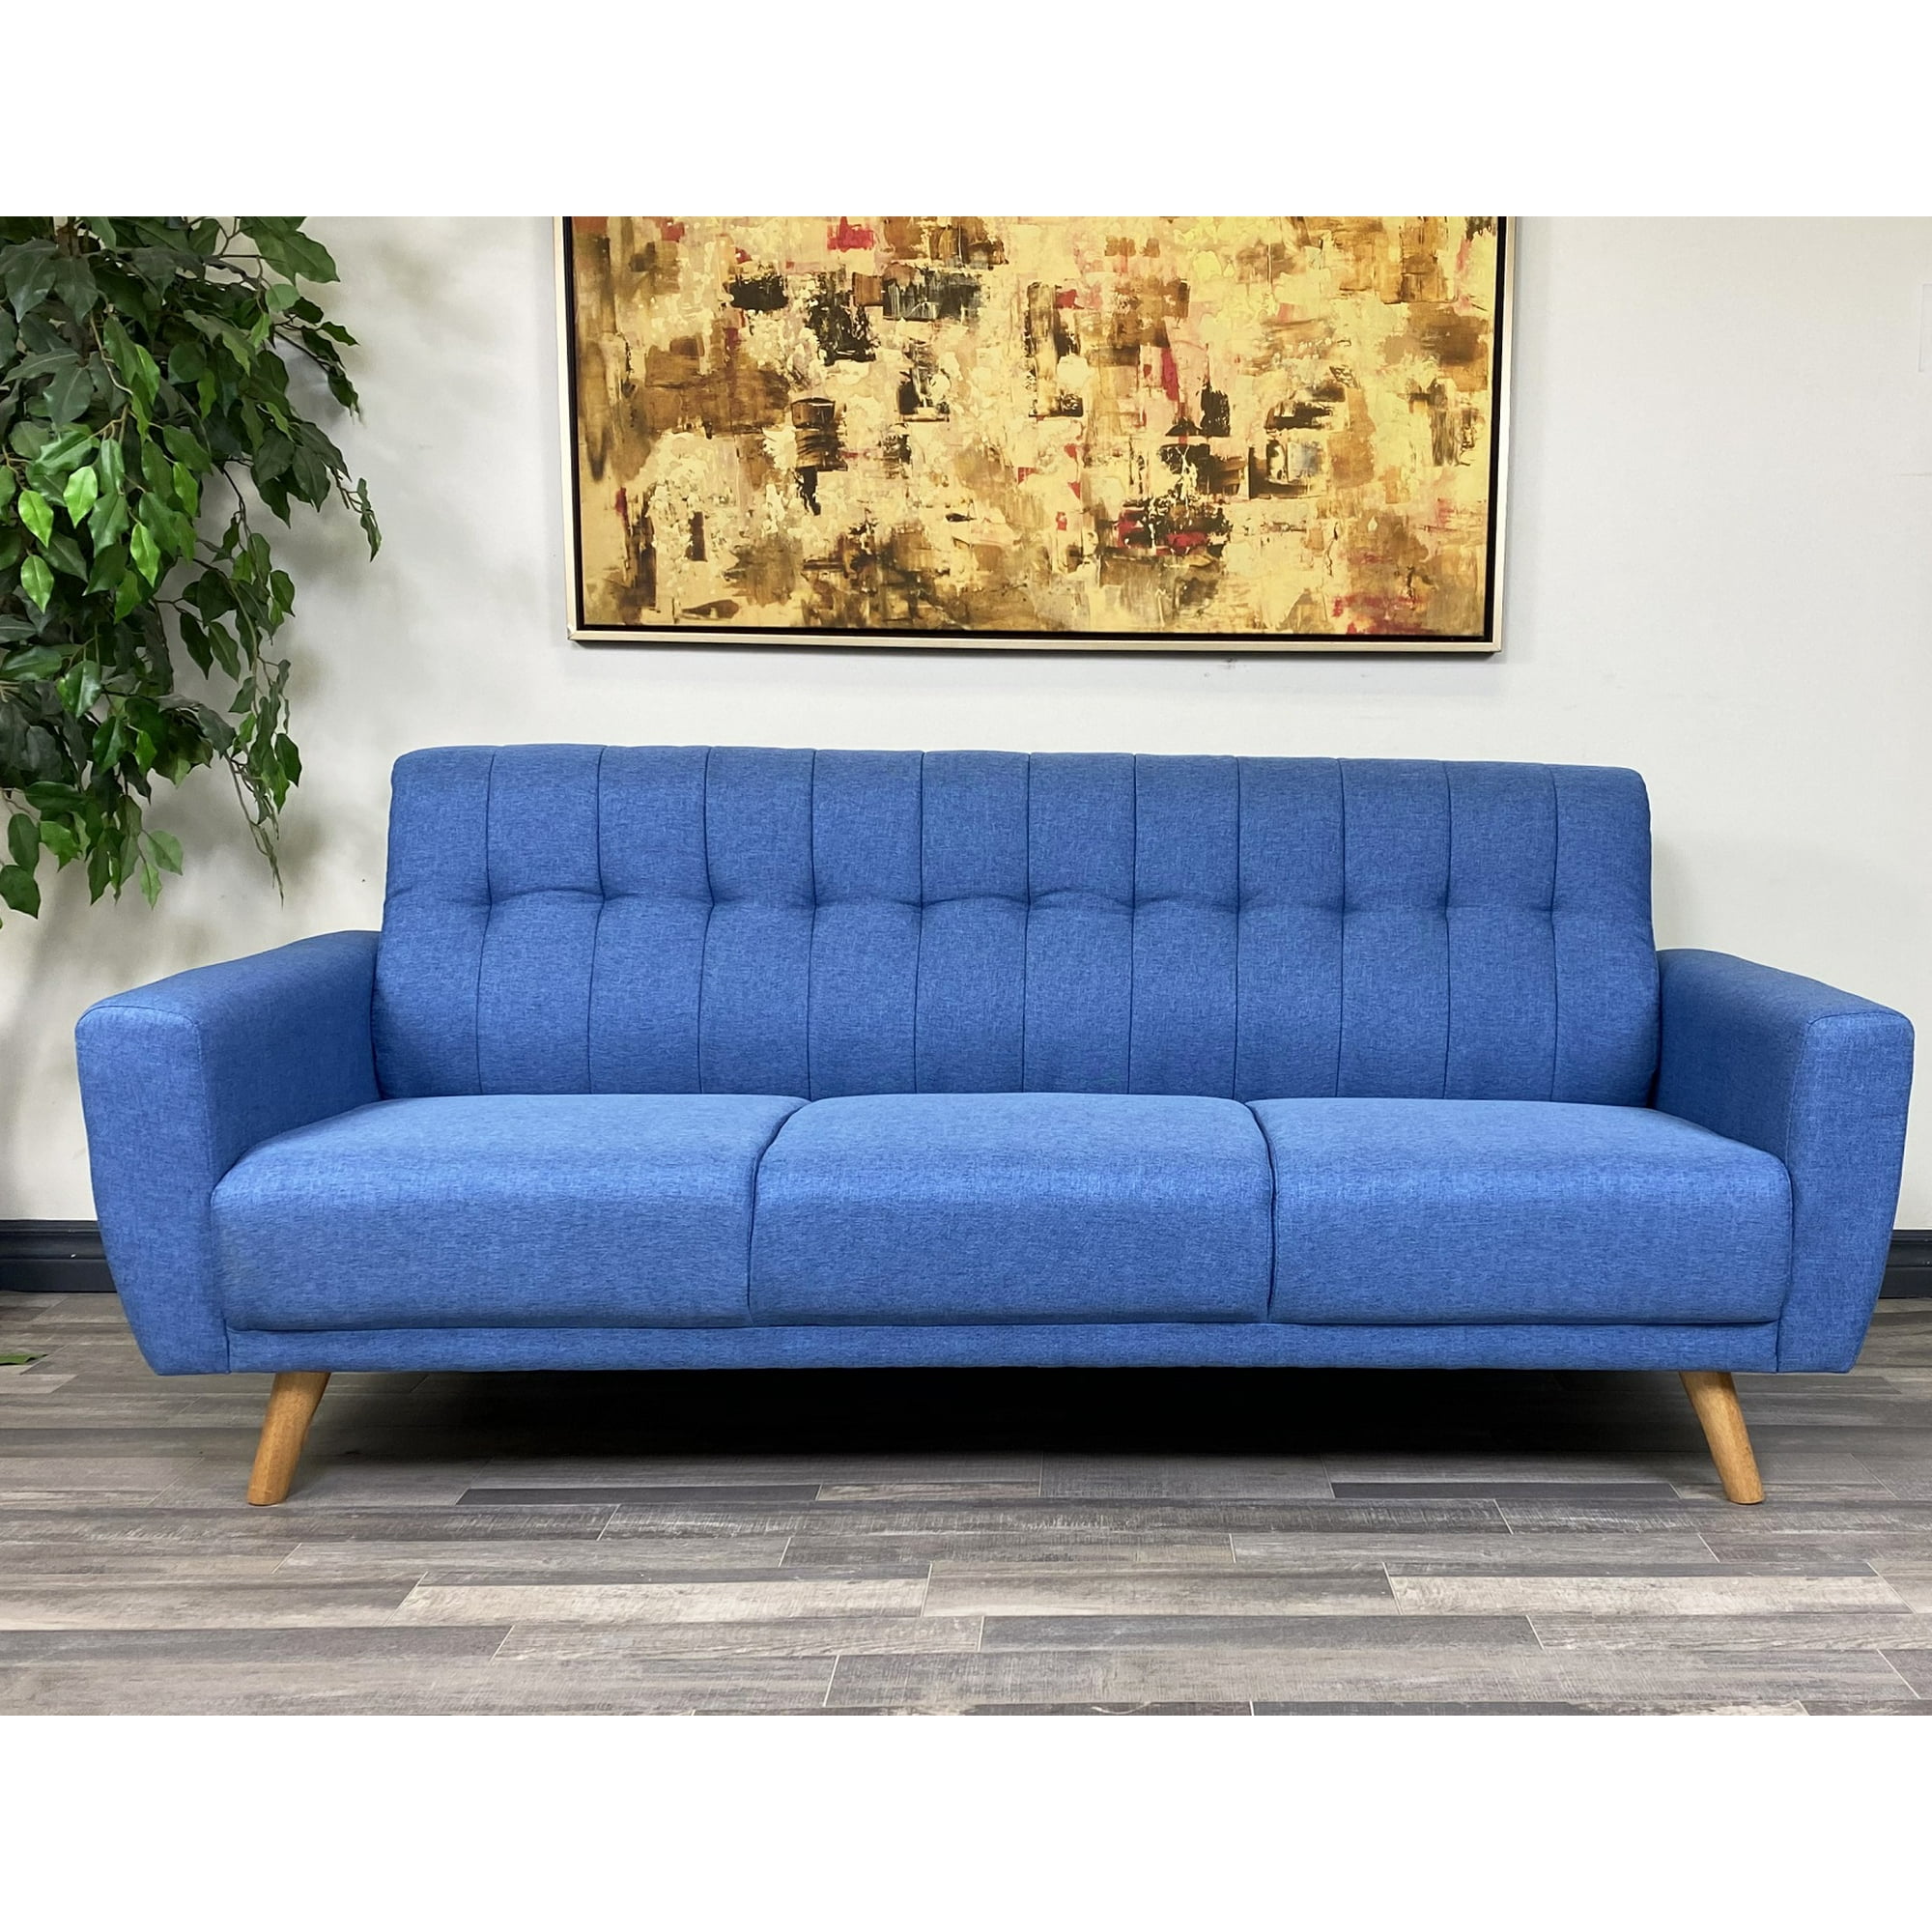 ViscoLogic MOCA Contemporary New Mid Century Tufted Style Fabric Upholstered Modern Living Room Sofa Walmart Canada